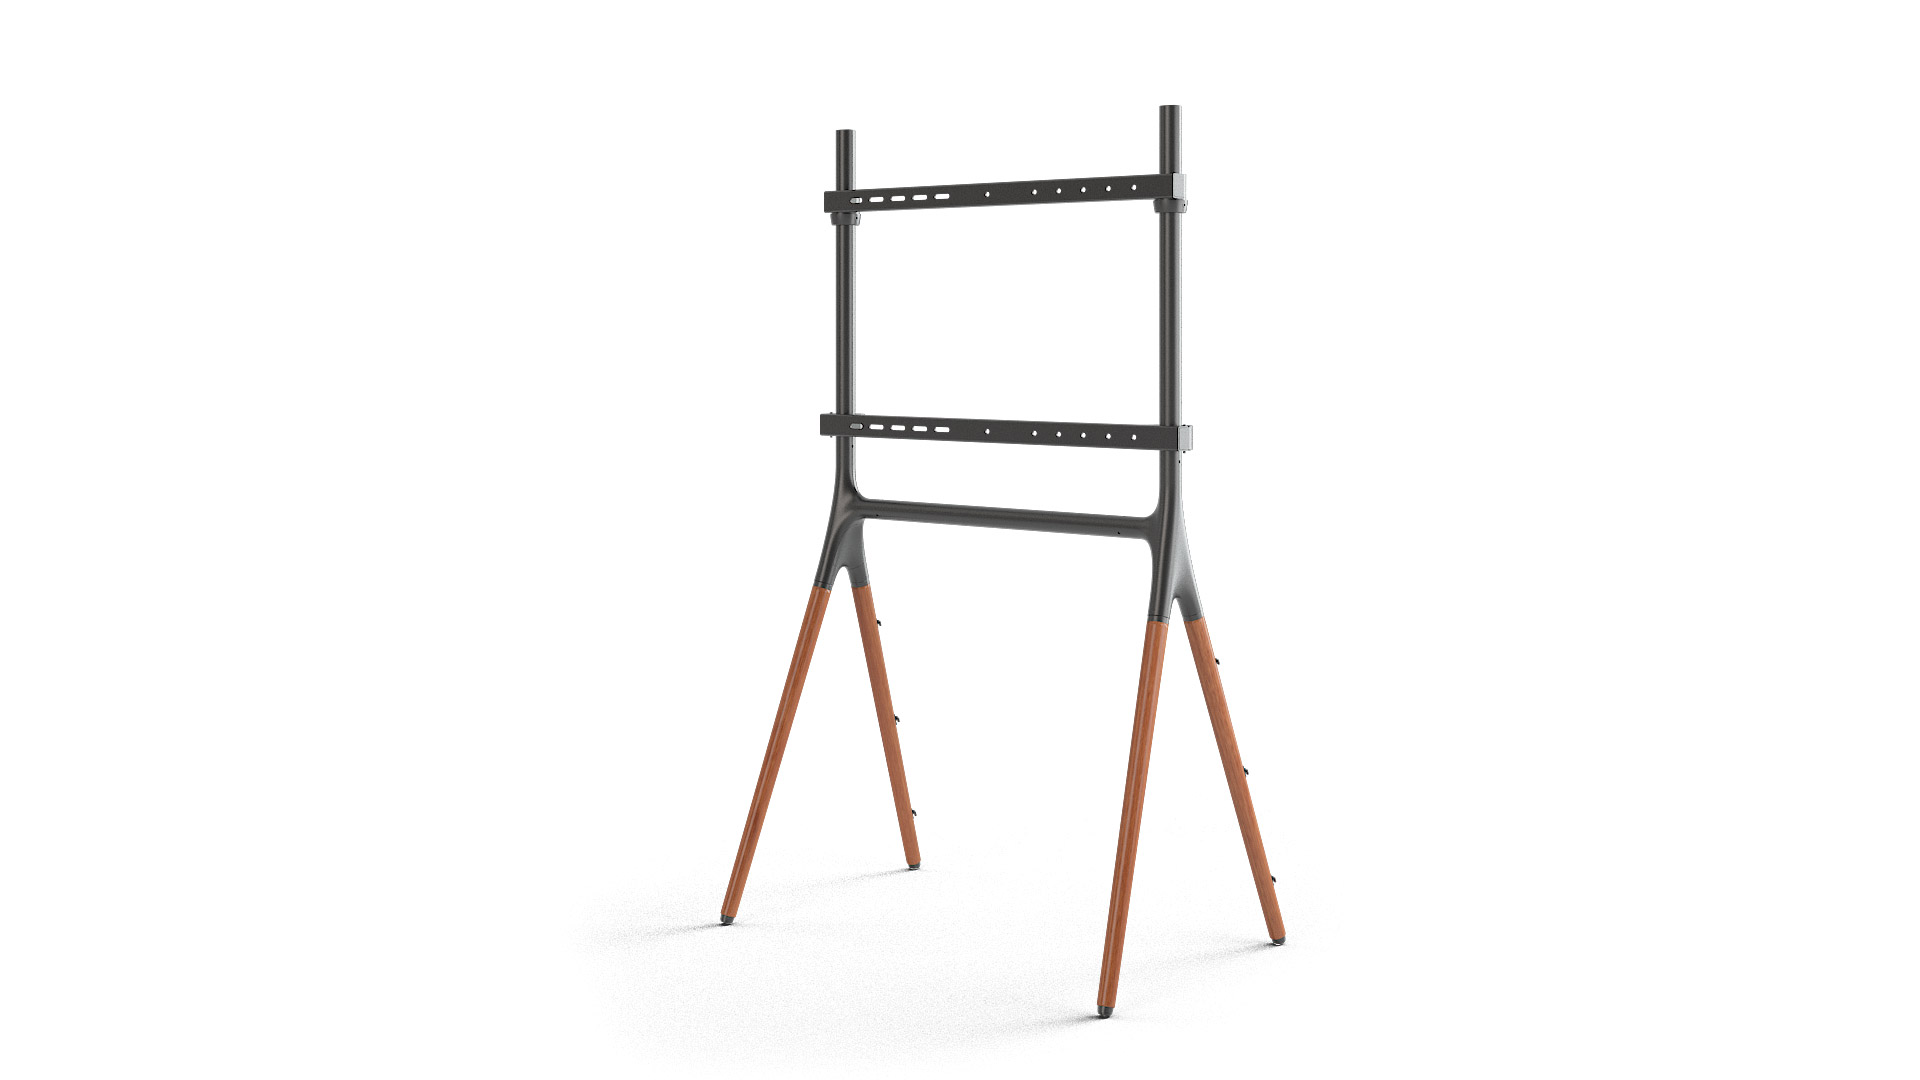 Easel Studio TV Floor Stand with Four Legs Supplier and Manufacturer- LUMI